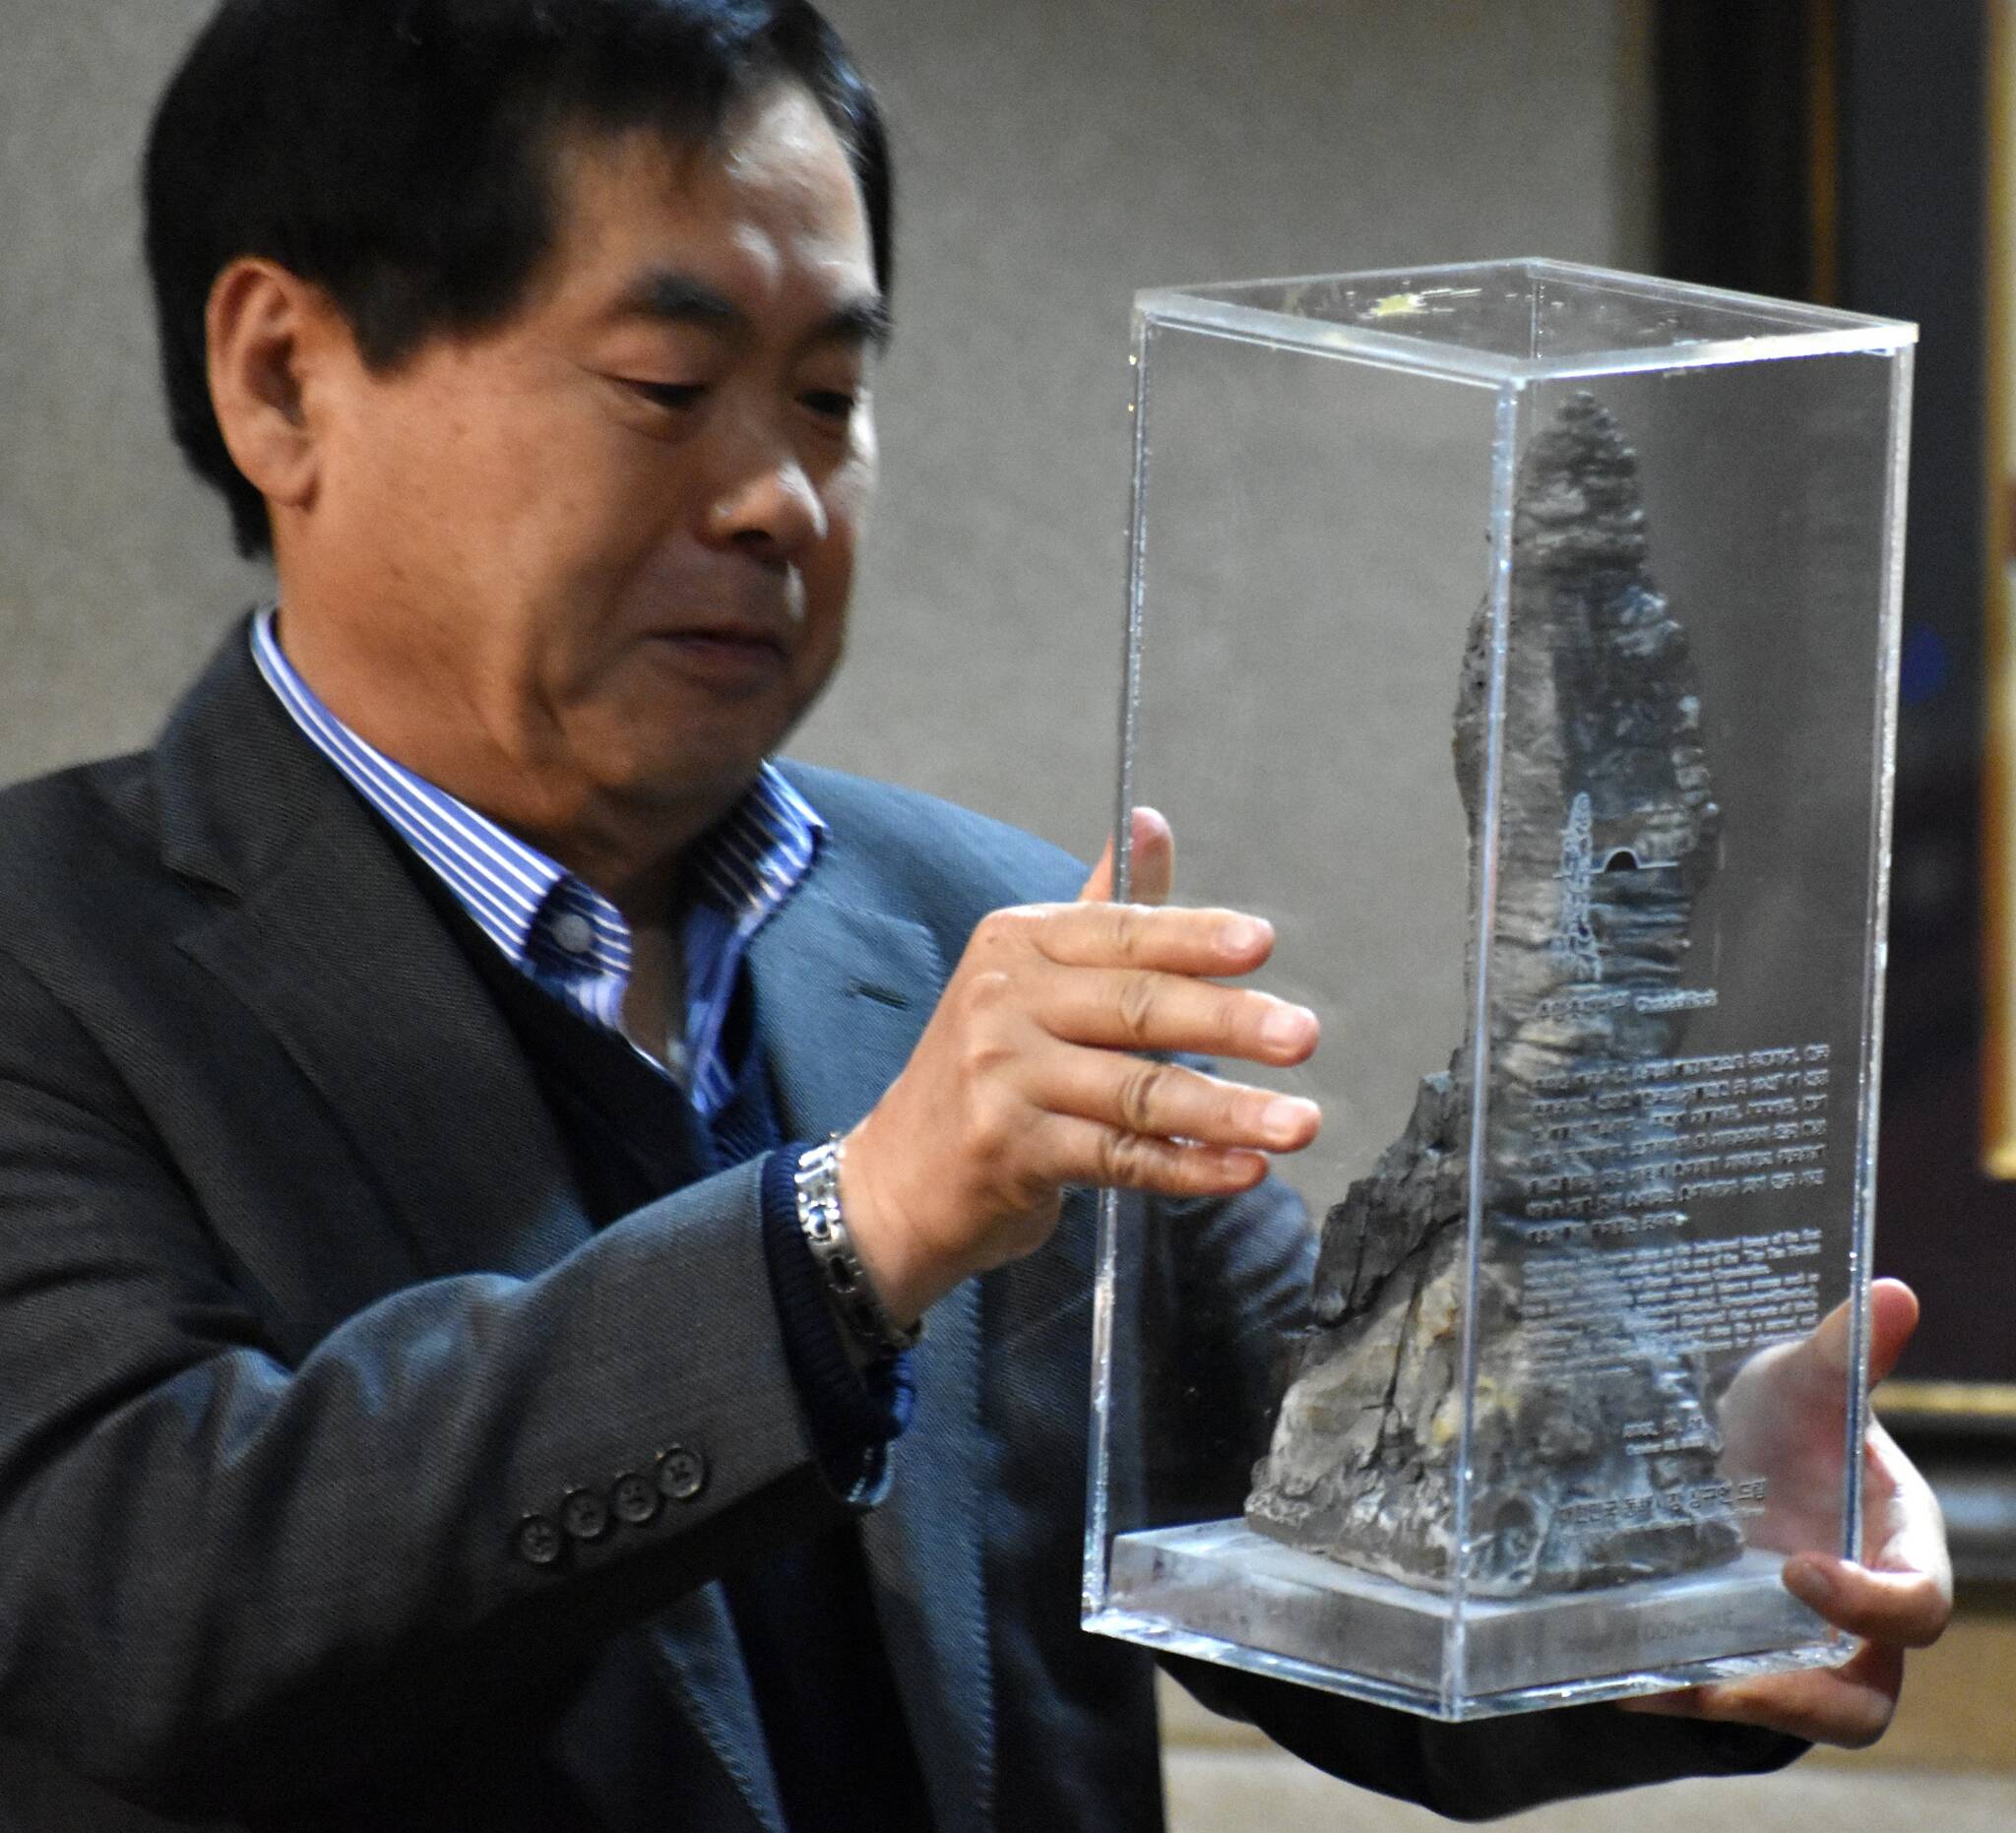 Federal Way received a Plaque of Appreciation and a unique, eye-catching rock from the beaches of Donghae City, its sister city in South Korea since 2000. Former Mayor Michael Park presented the plaque and gave a brief presentation about Donghae City during the Dec. 6 city council meeting. In this photo, Park presents the unusual-looking rock gifted by mayor Shim Gyu-eon.